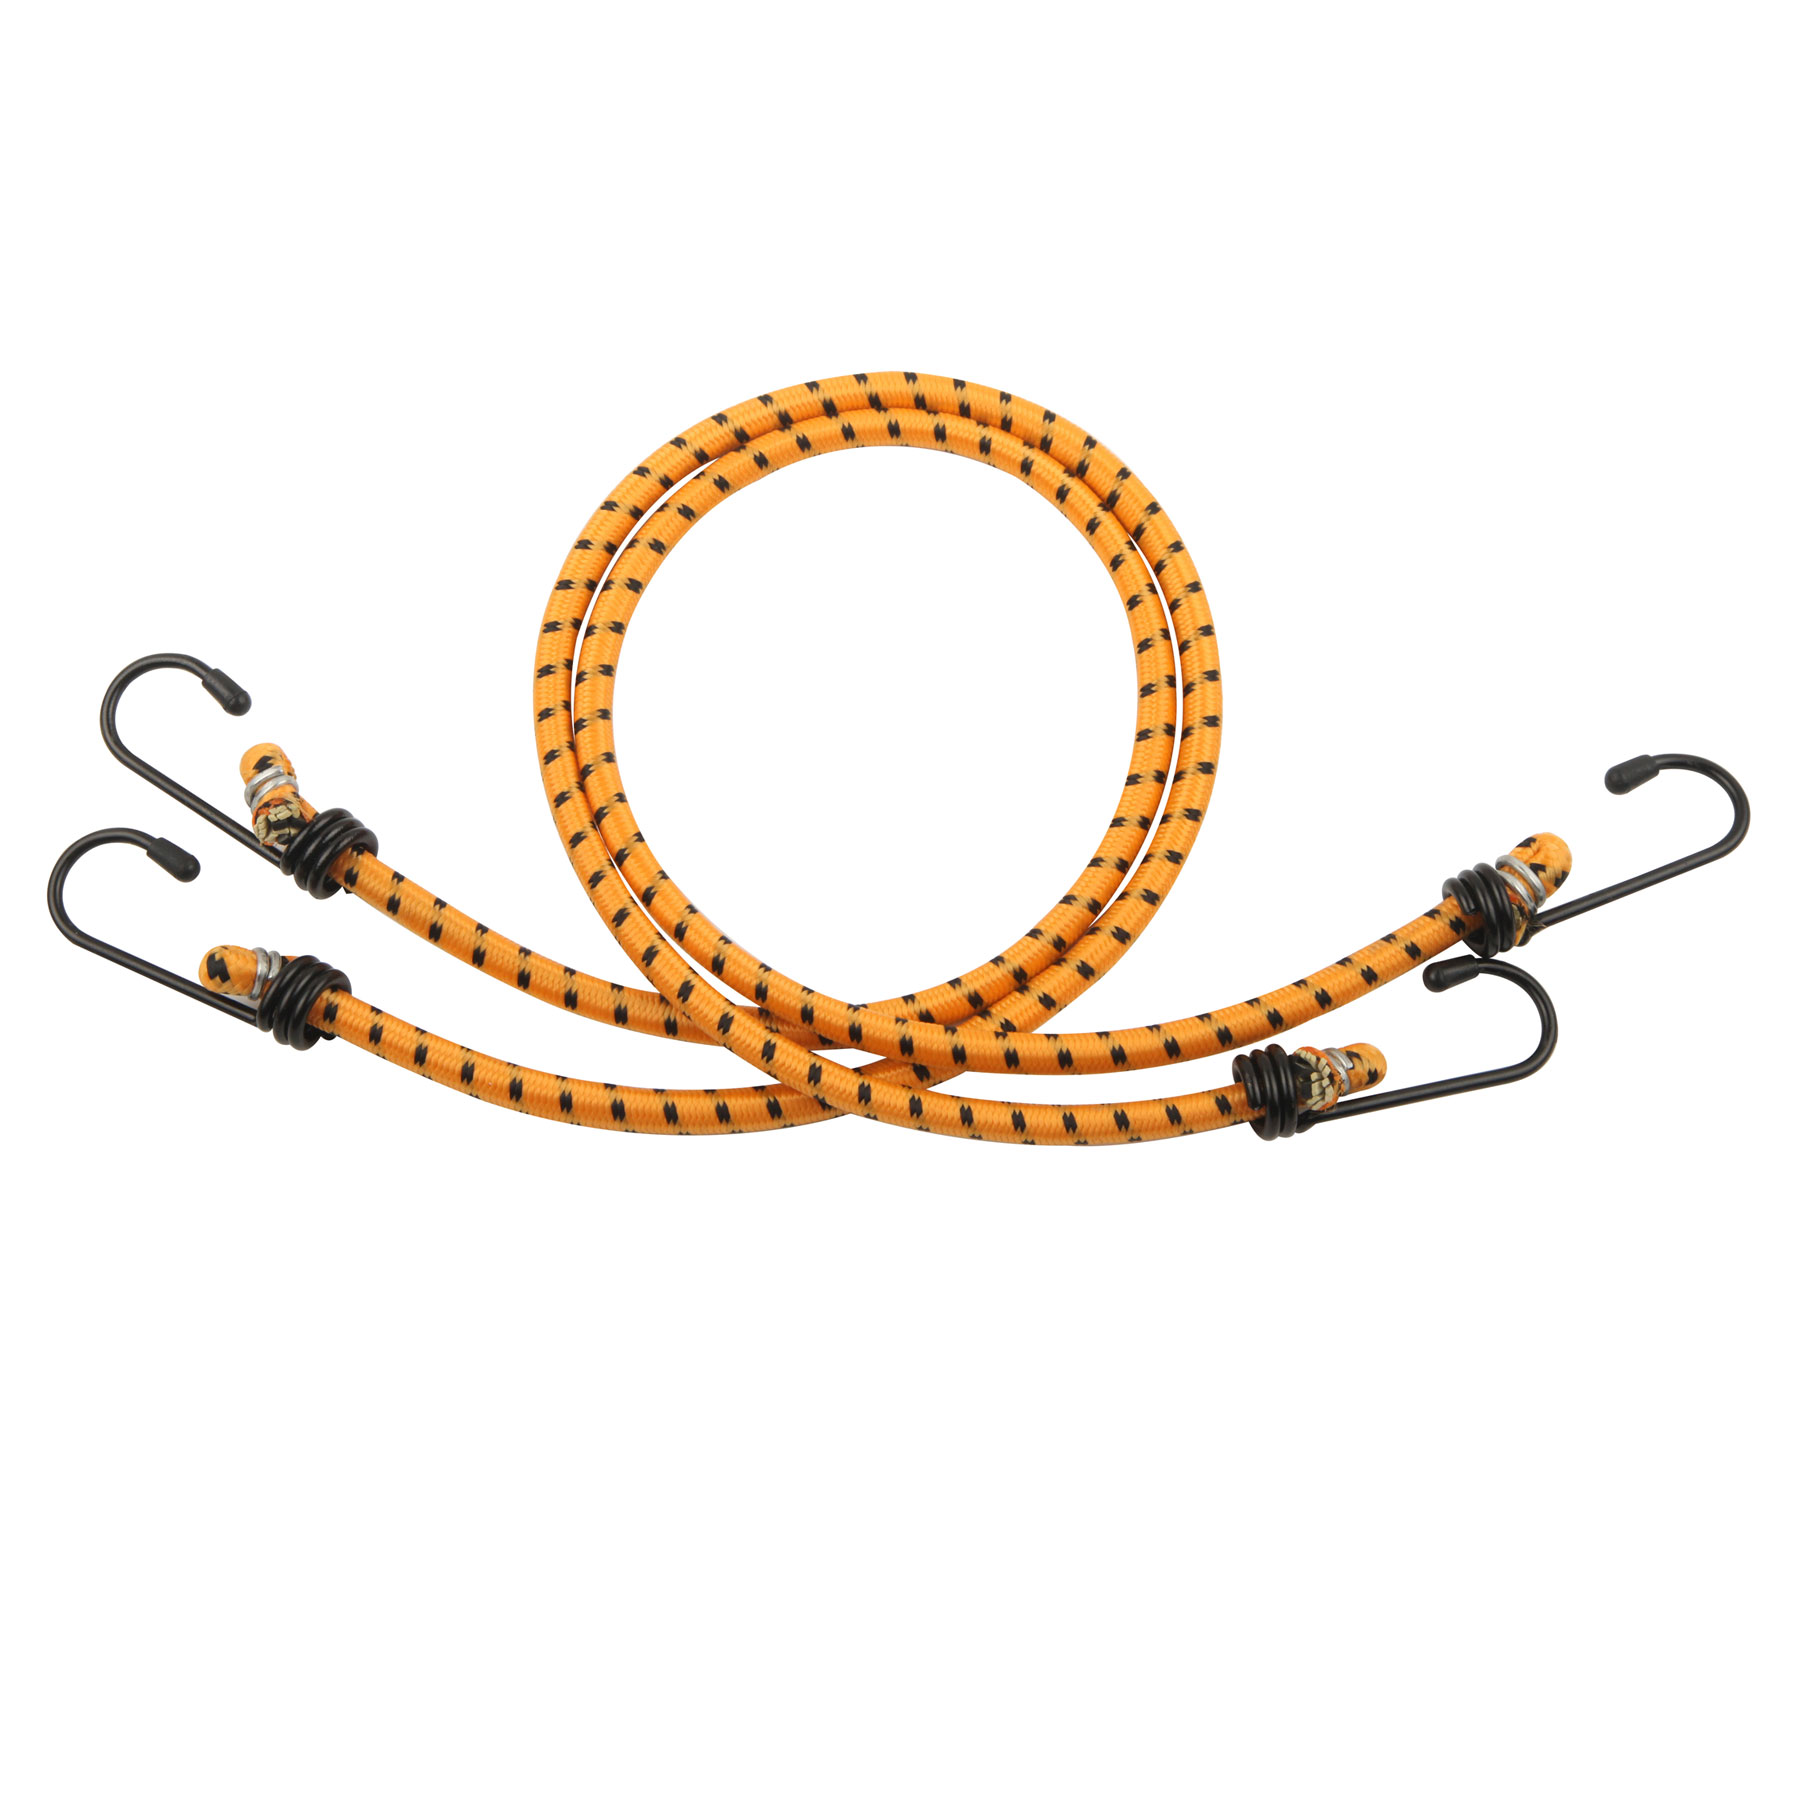 BUNGEE STRETCH CORD 24